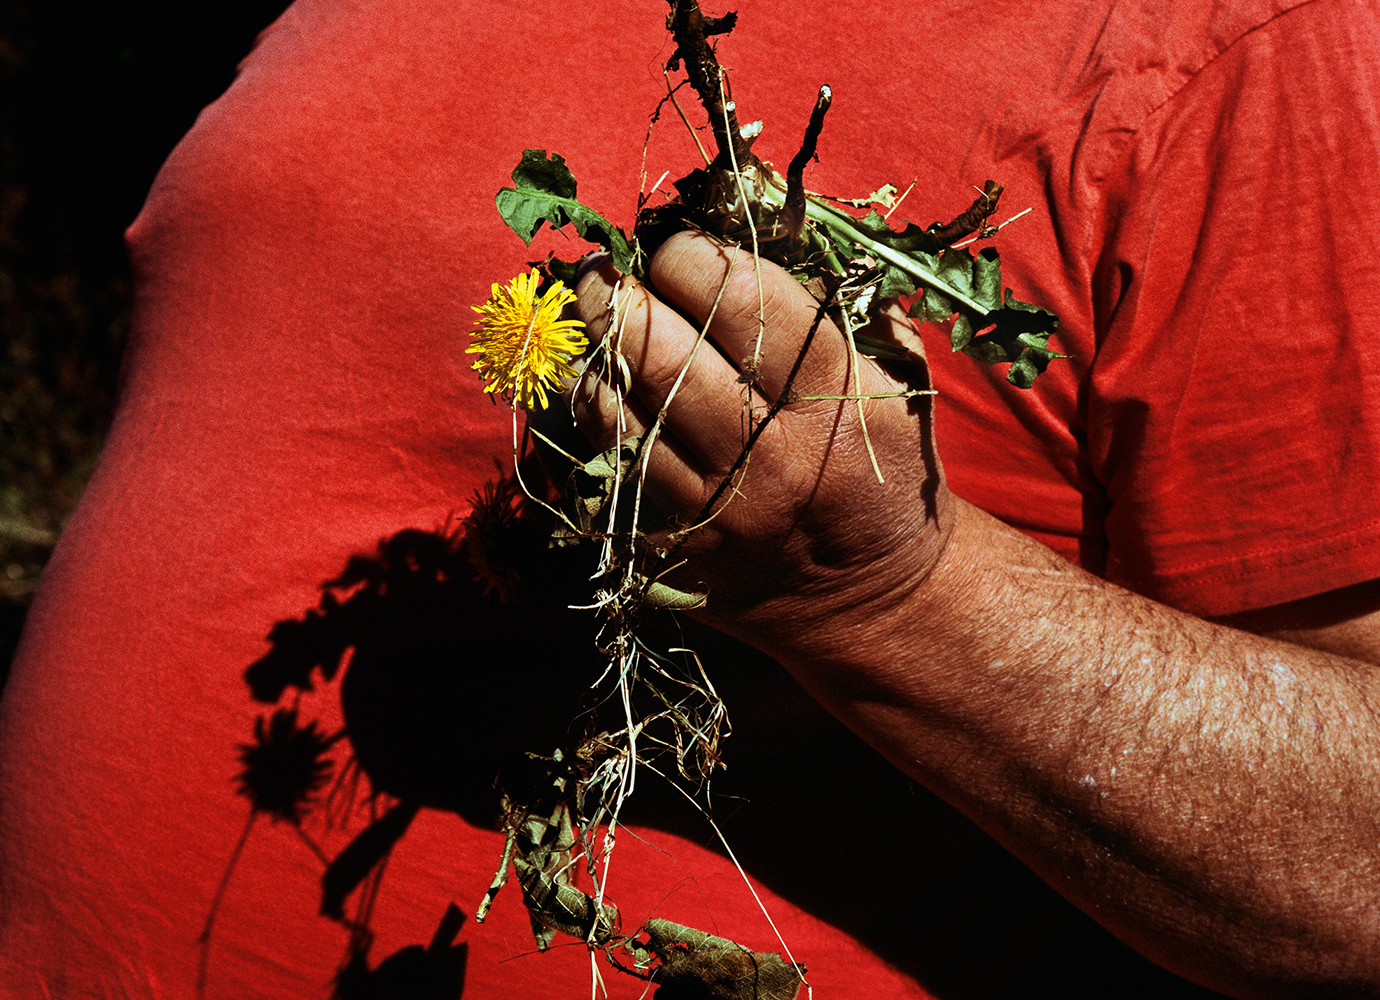 ‘Even weeds can have a soul.’ Finding joy with photographer Kuba Ryniewicz